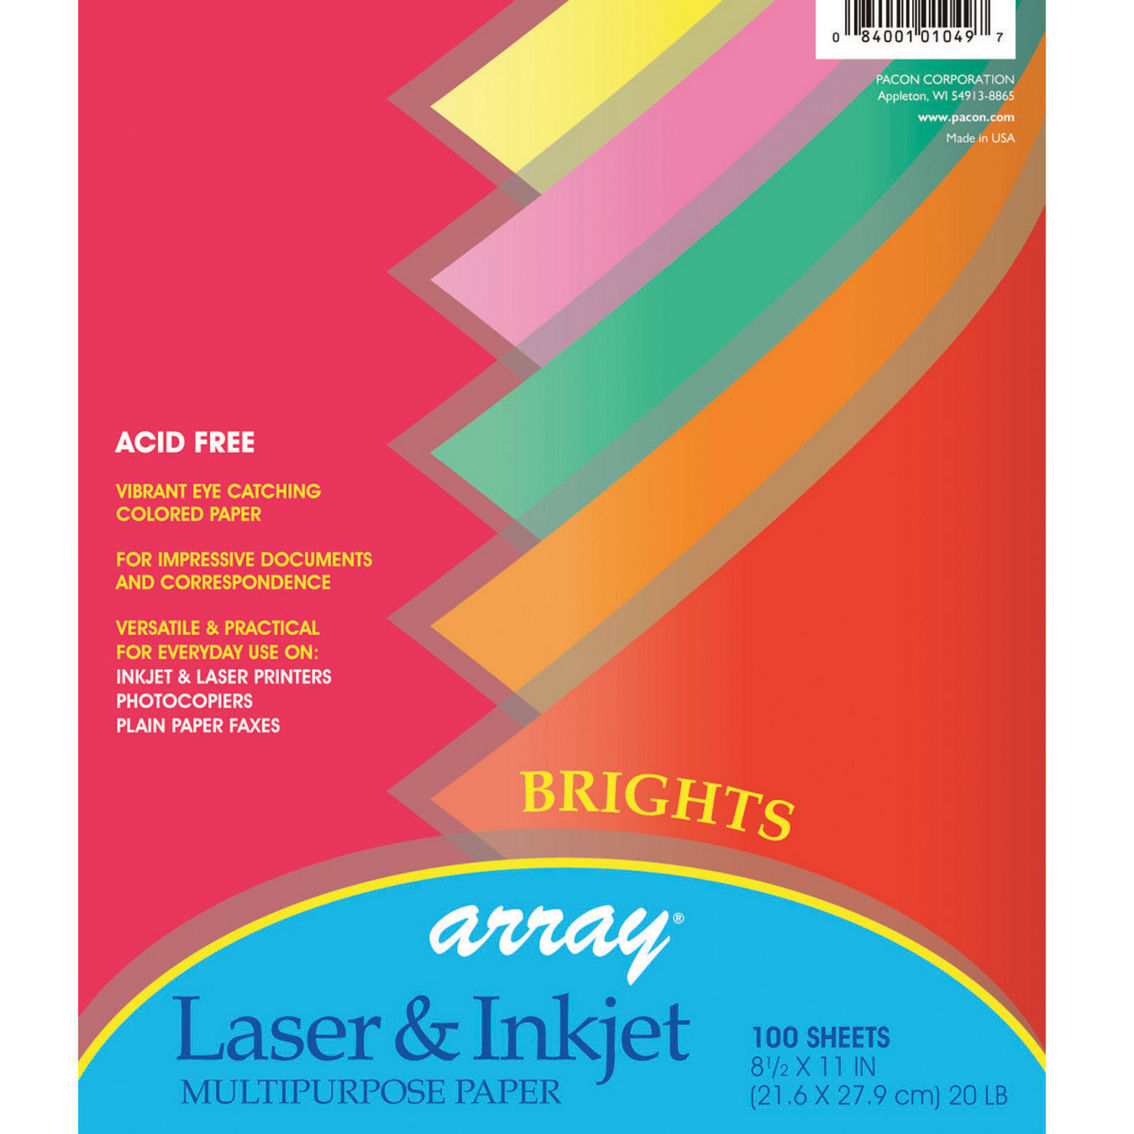 Pacon® Bright Multi-Purpose Paper, 5 Assorted Colors, 100 Sheets Per Pack, 3 Packs - Image 2 of 2